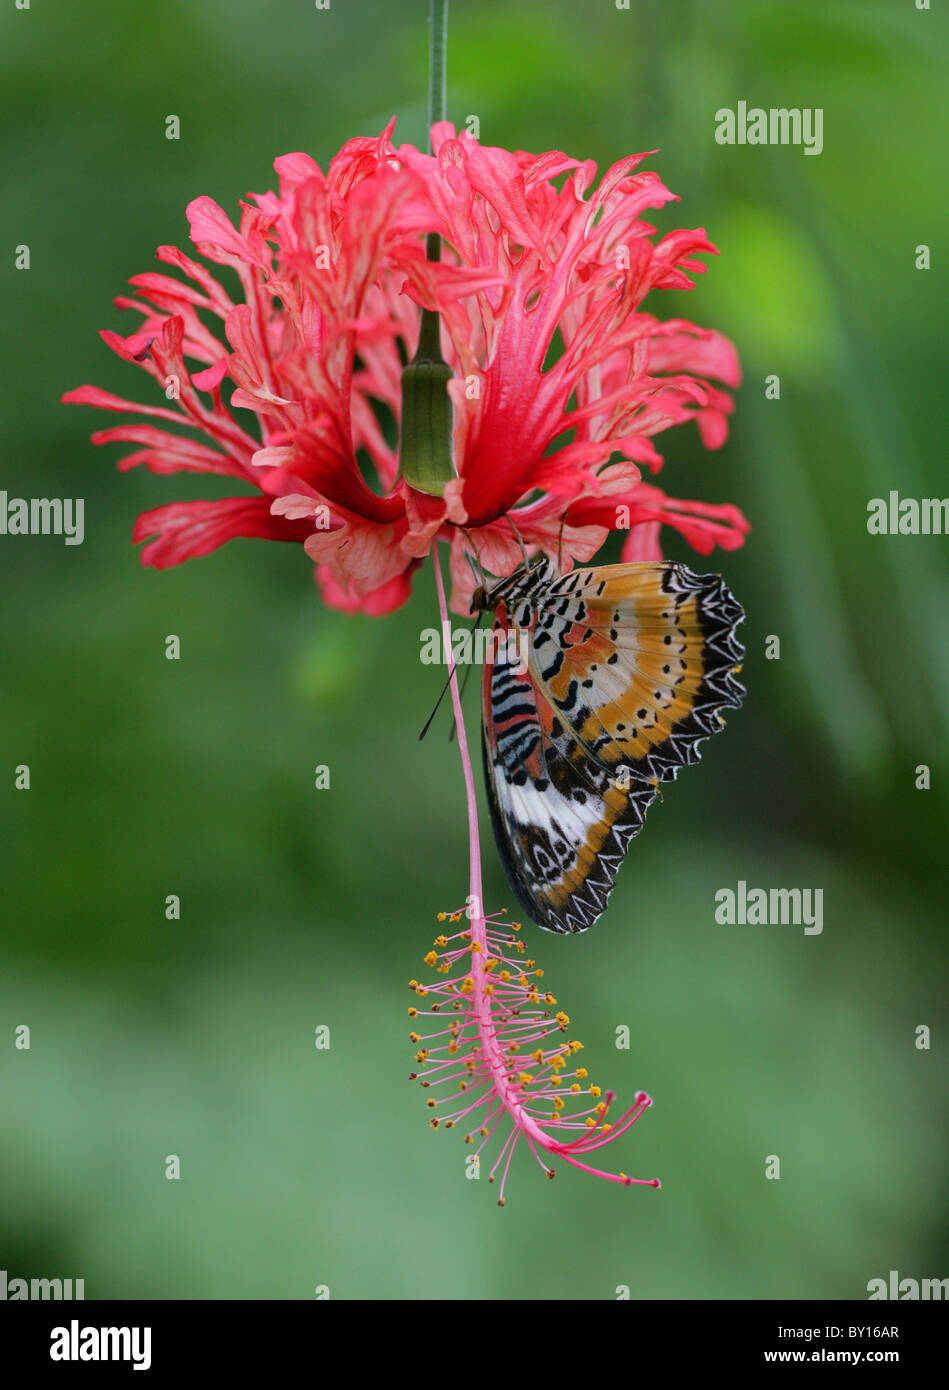 Red Lacewing Butterfly, Cethosia biblis, Nymphalidae on Japanese Lantern or Coral Hibiscus, Hibiscus schizopetalus, Malvaceae. Stock Photo